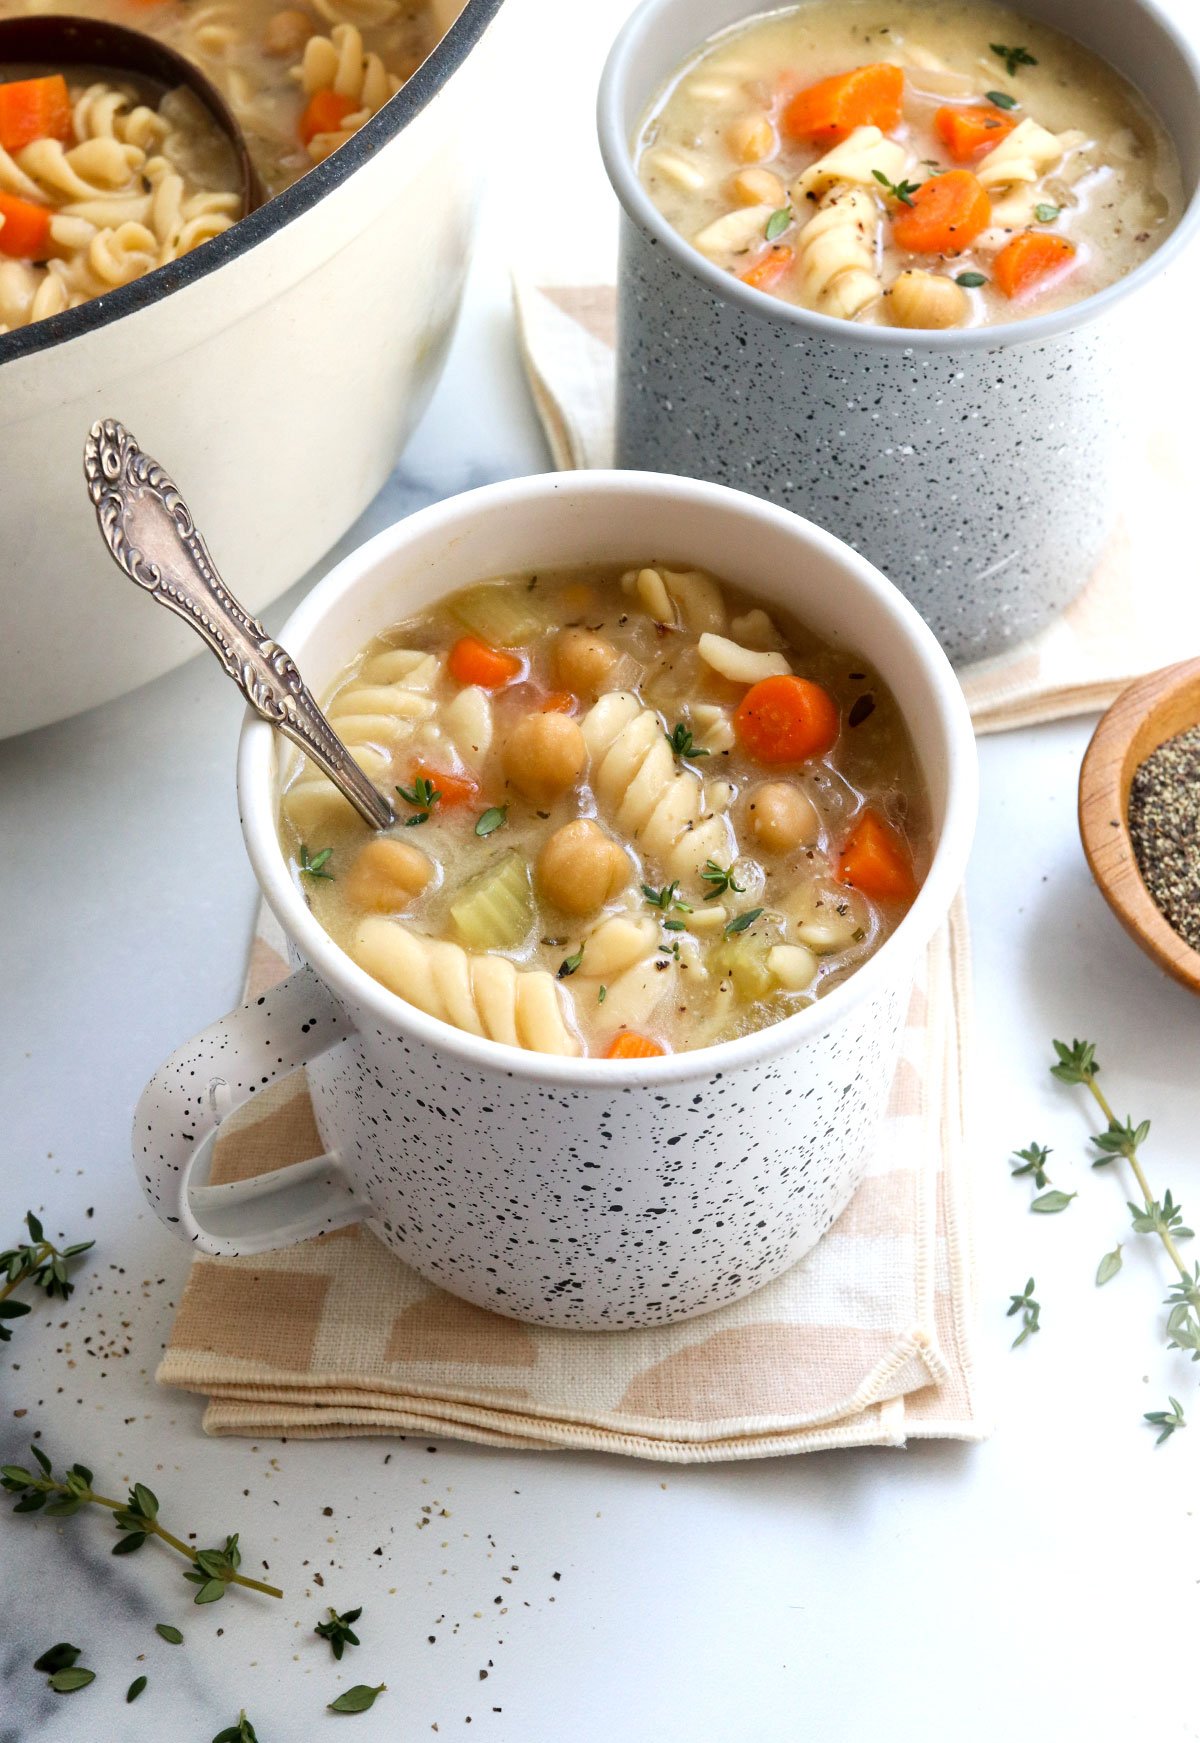 chickpea noodle soup in 2 mugs